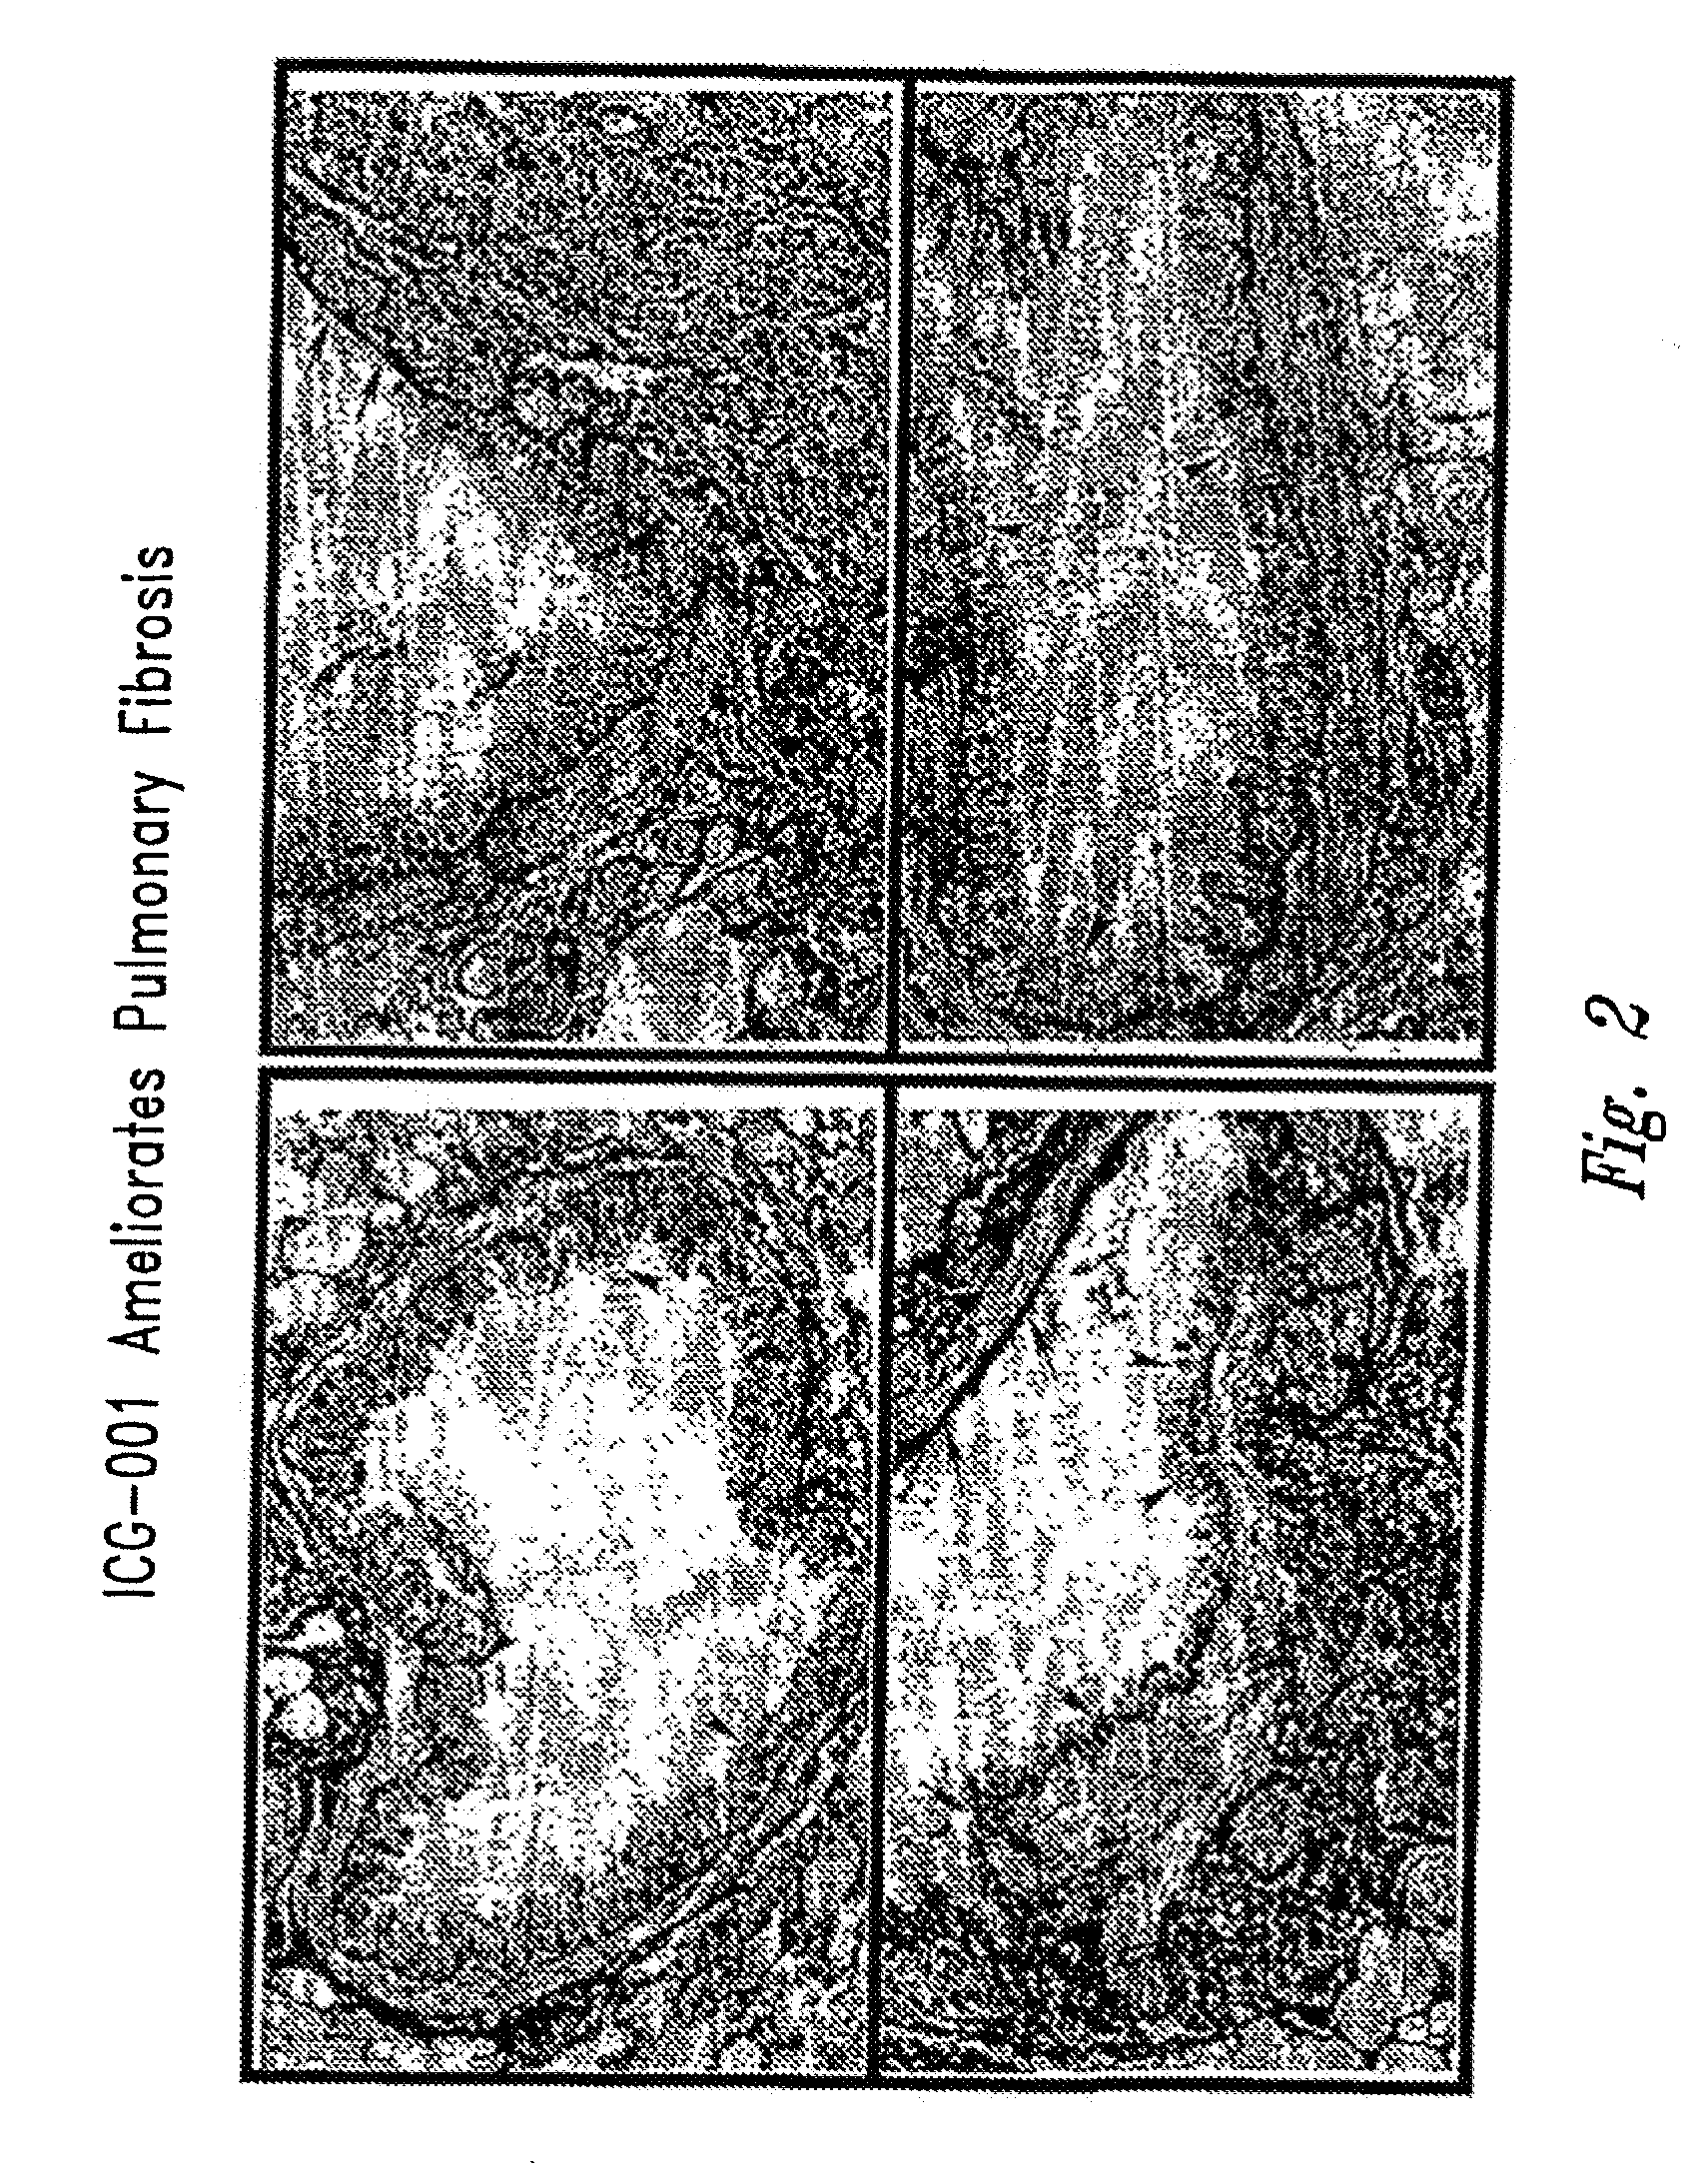 Methods relating to the treatment of fibrosis